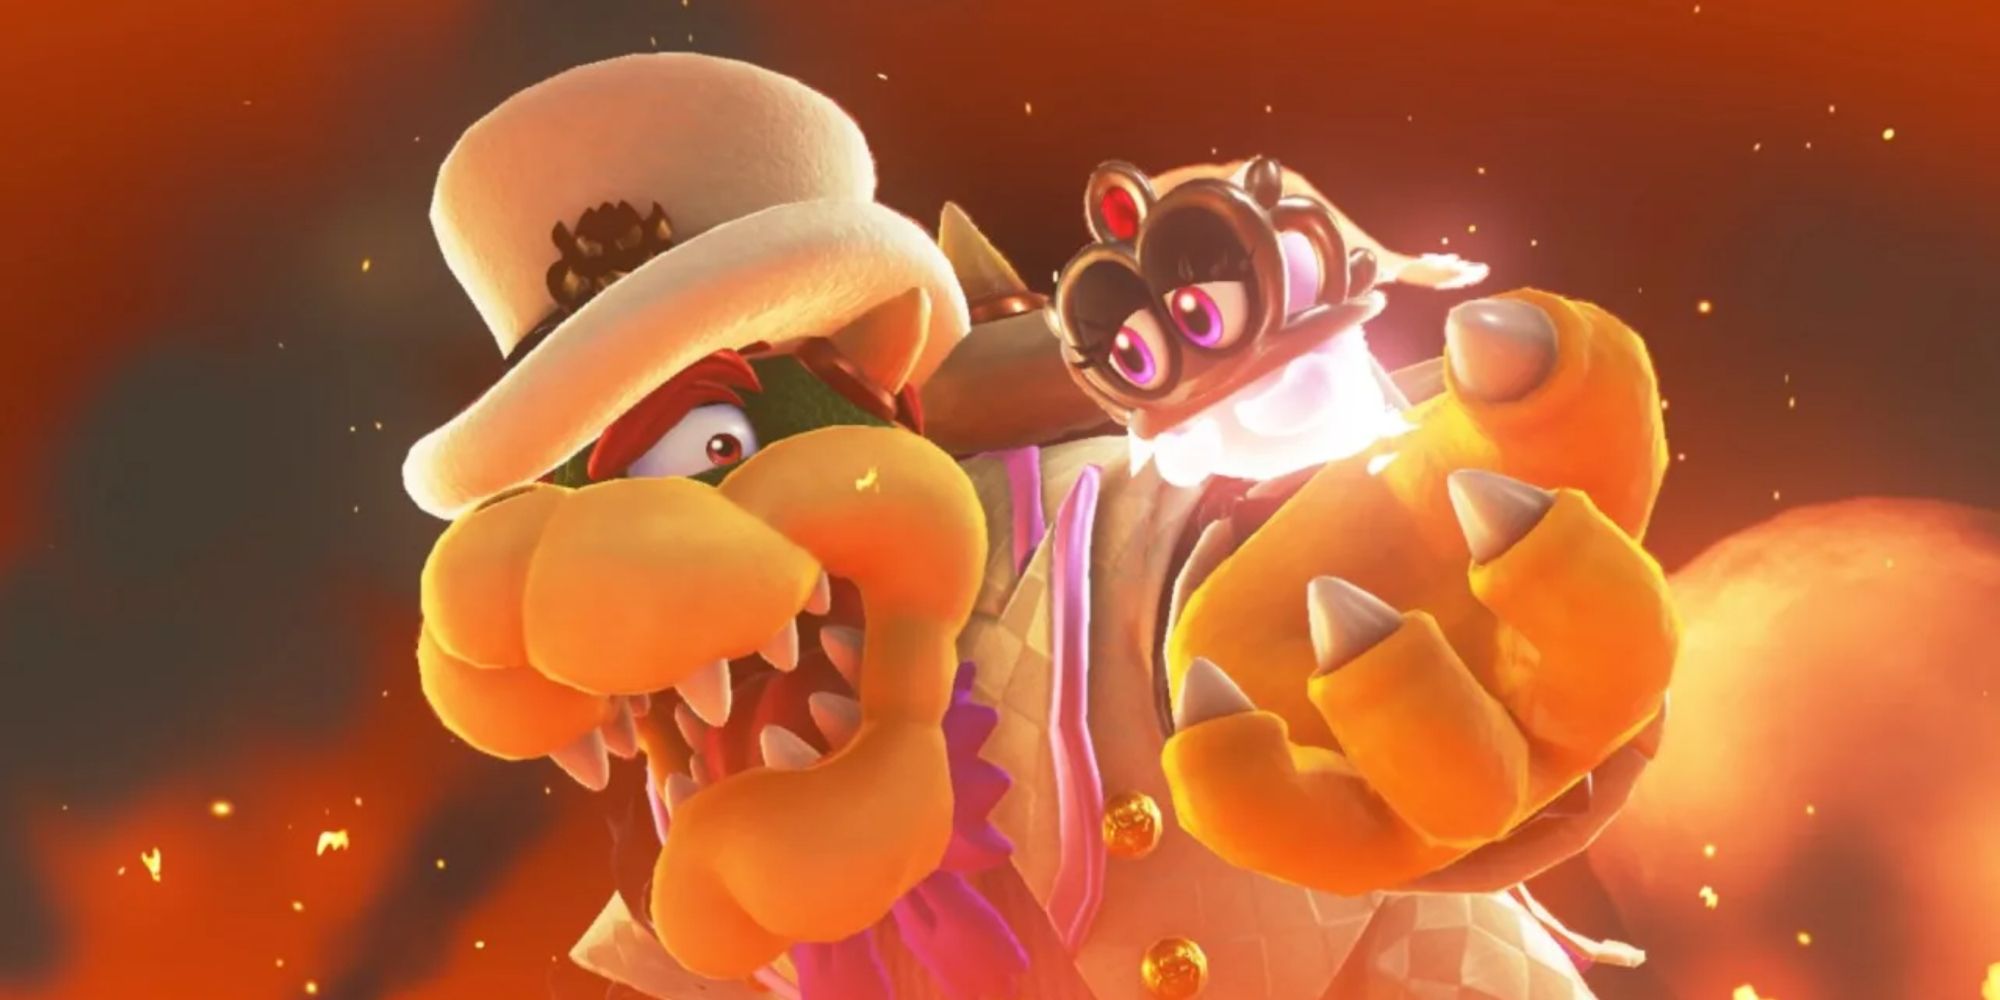 Bowser Holding A Ghost While Wearing A White Suit